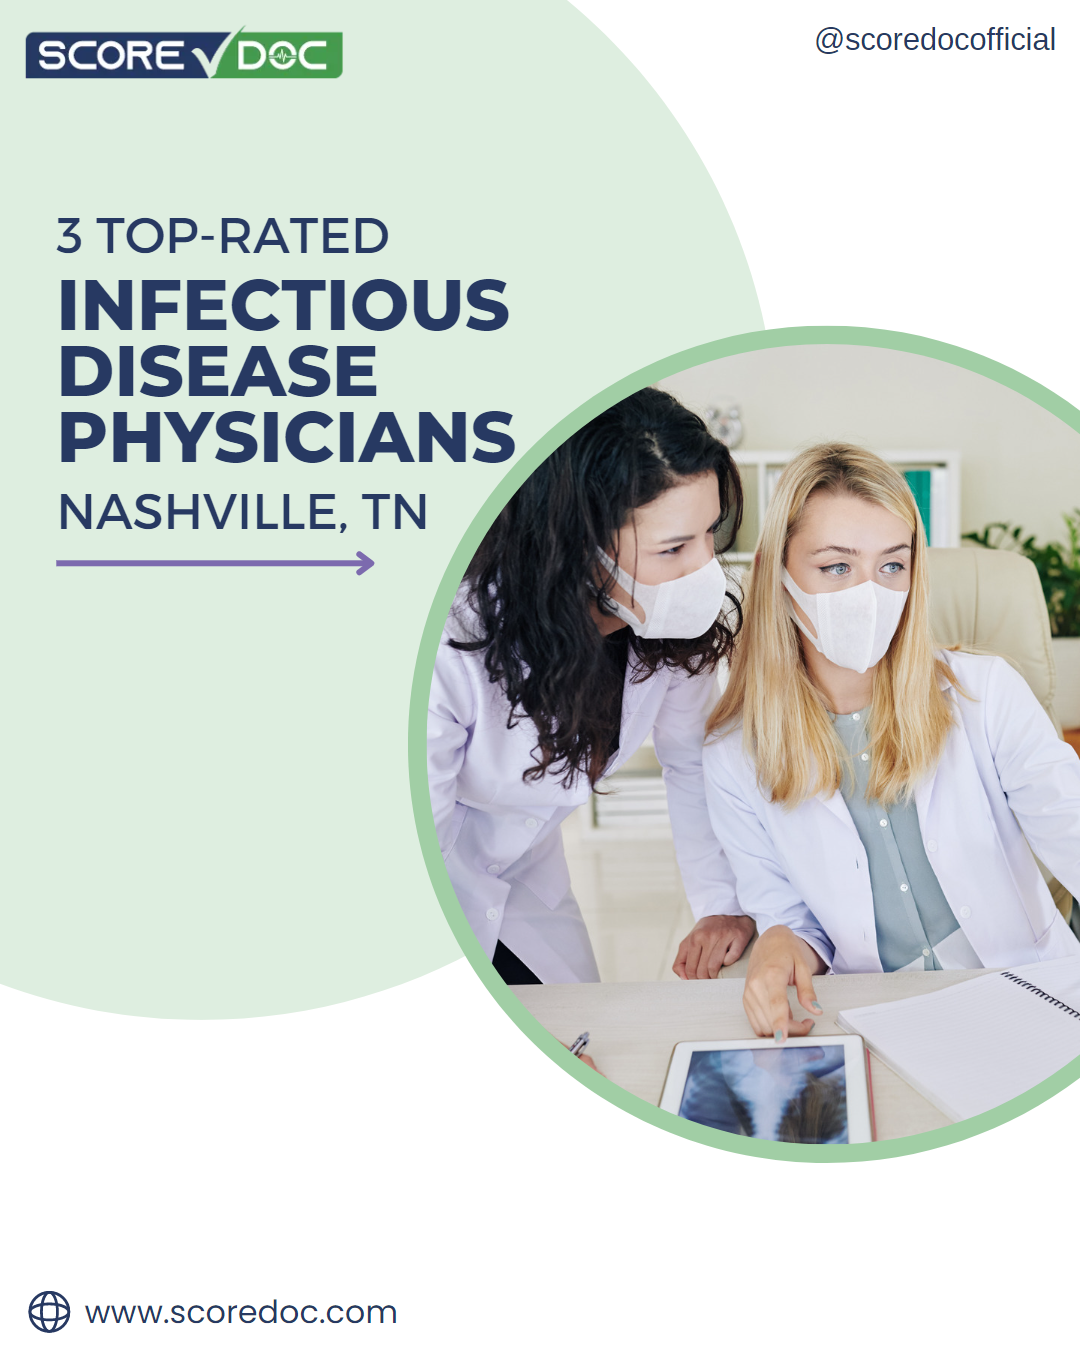 @scoredocofficial

3 TOP-RATED
INFECTIOUS
DISEASE

PHYSICIANS
NASHVILLE, TN

  

 

@ www.scoredoc.com